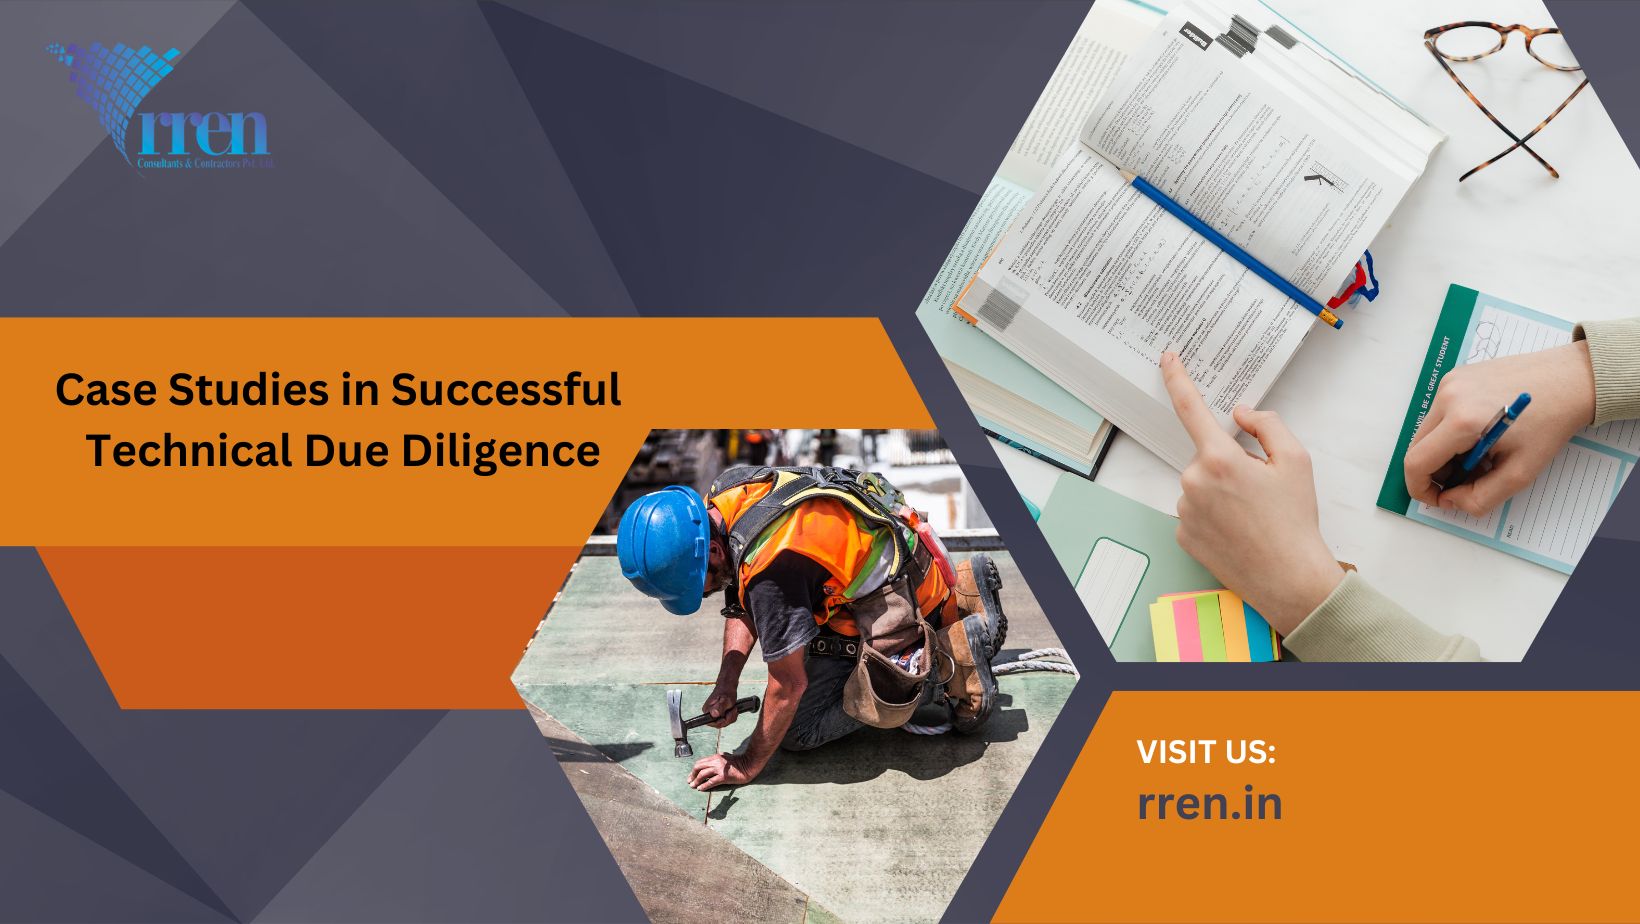 Case Studies in Successful Technical Due Diligence